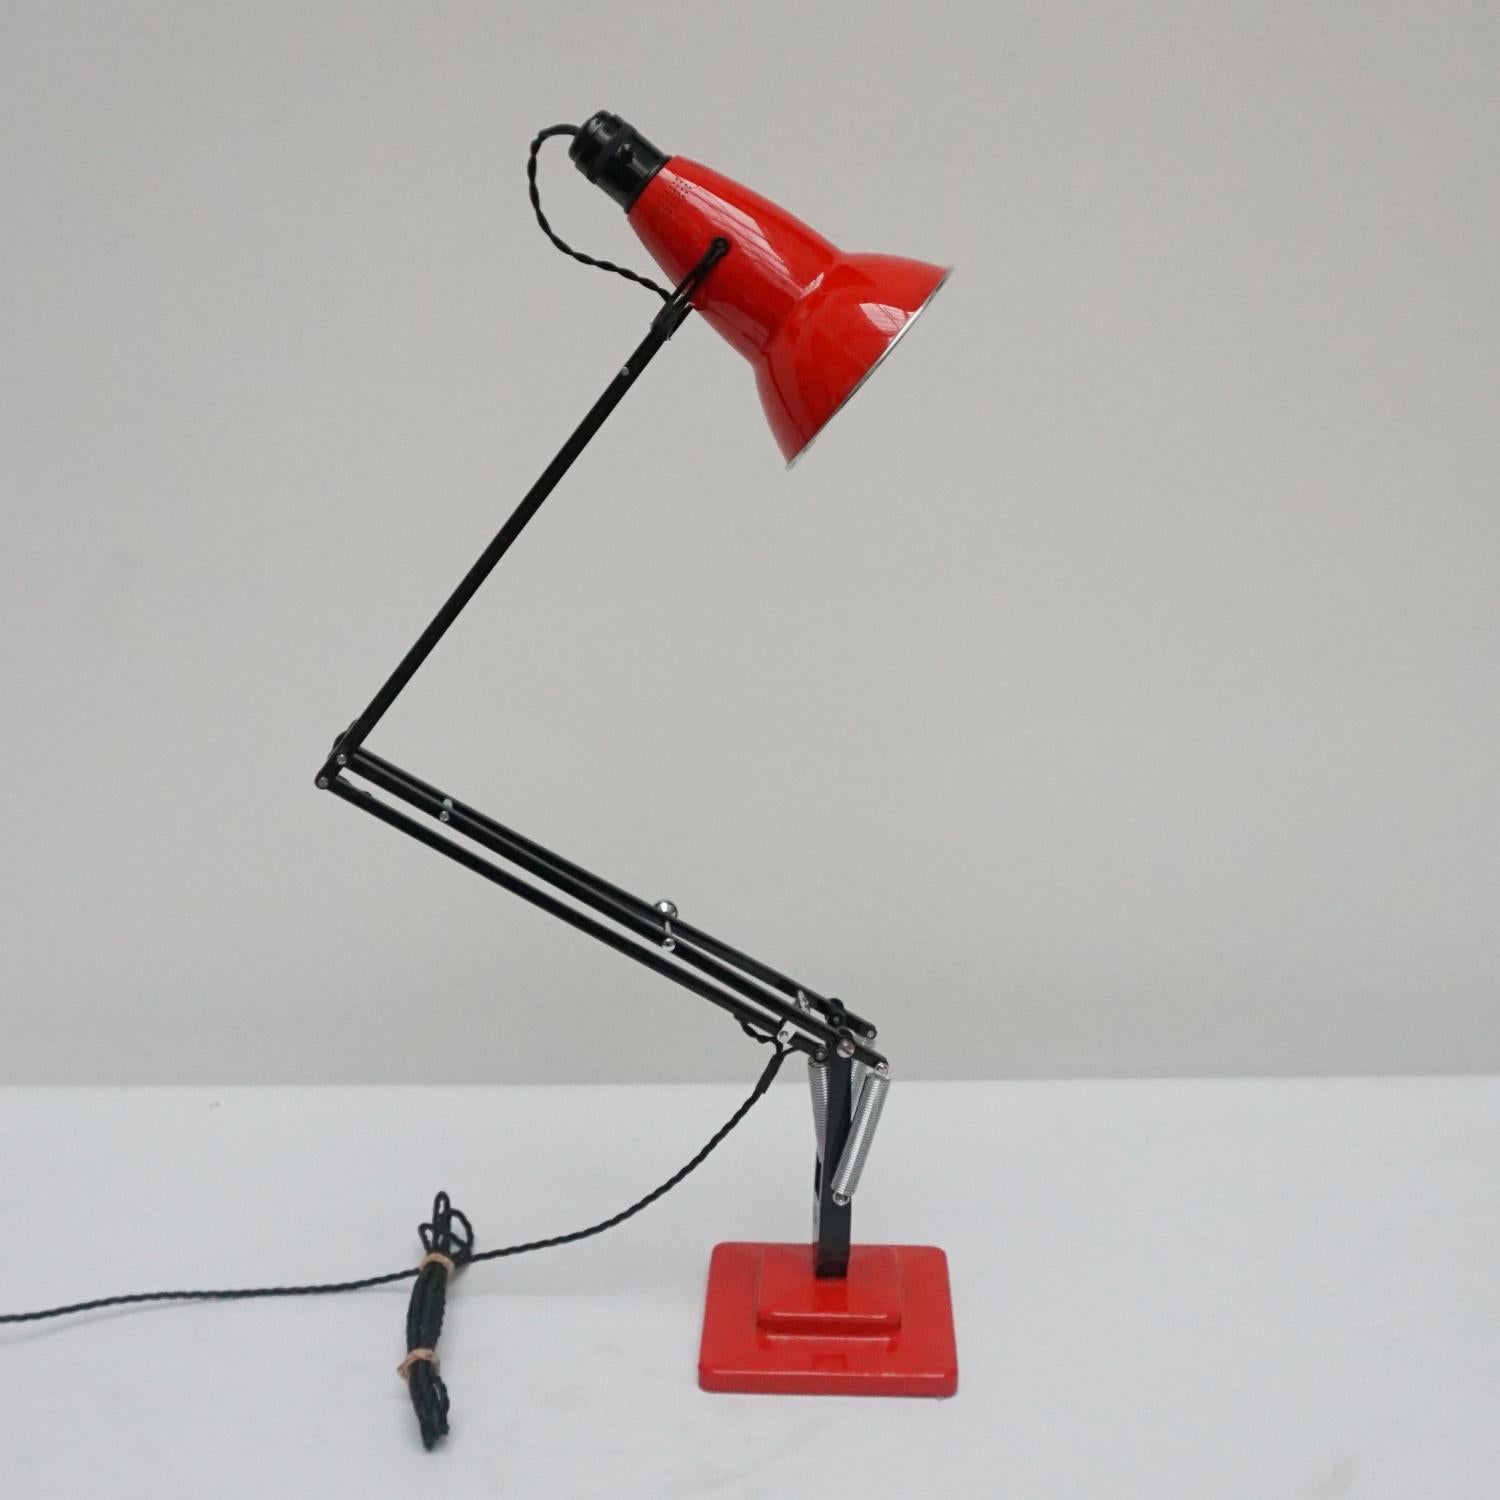 'Three-spring' 1930's prototype Anglepoise desk lamp by Herbert Terry & Sons. Black arm assembly with matching red two step base and perforated lamp shade. Original stamps to stem. The three spring Anglepoise lamp was first released by Herbert Terry